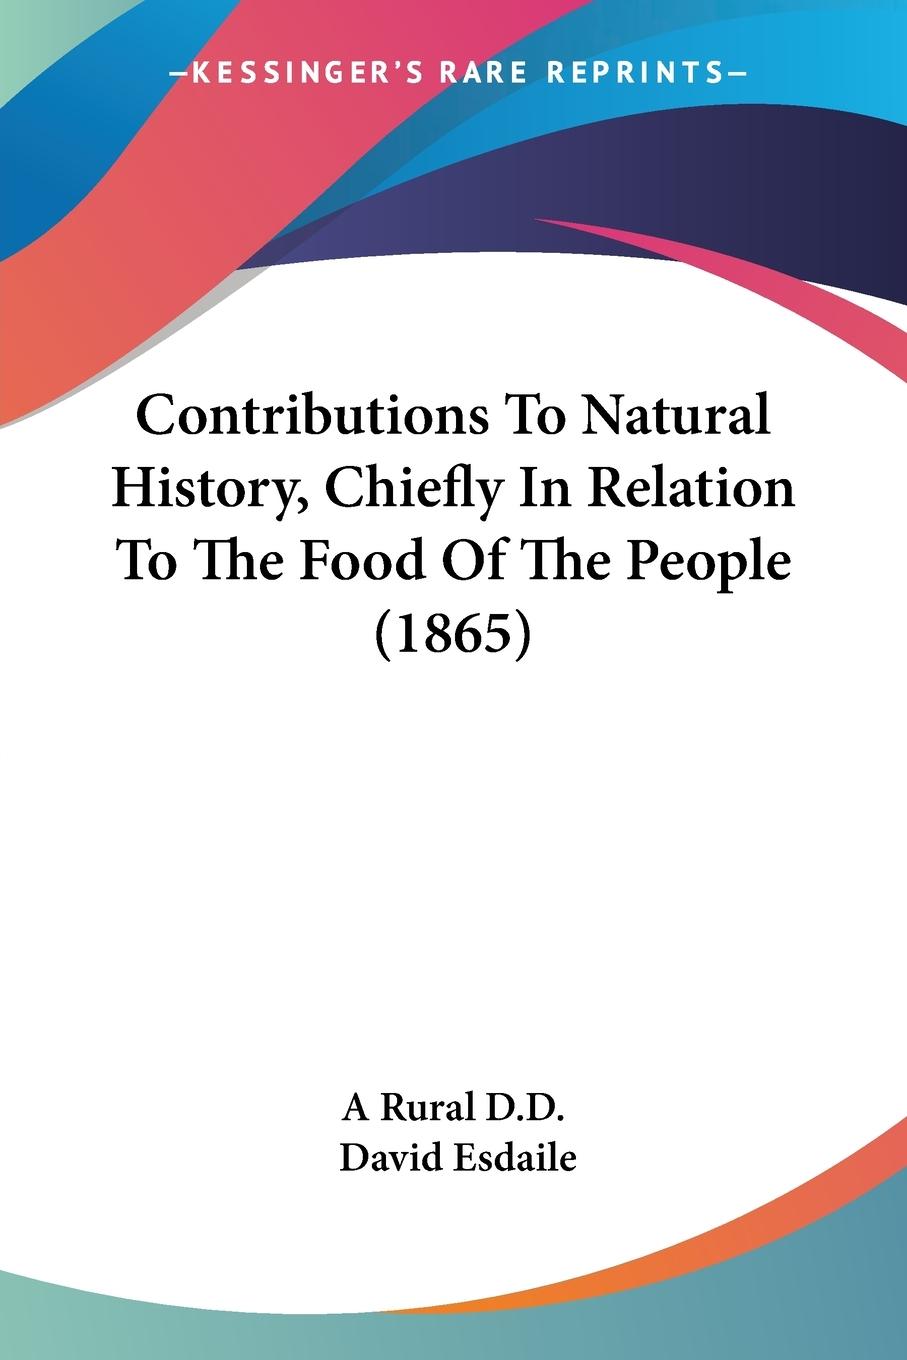 Contributions To Natural History, Chiefly In Relation To The Food Of The People (1865) - A Rural D. D. Esdaile, David